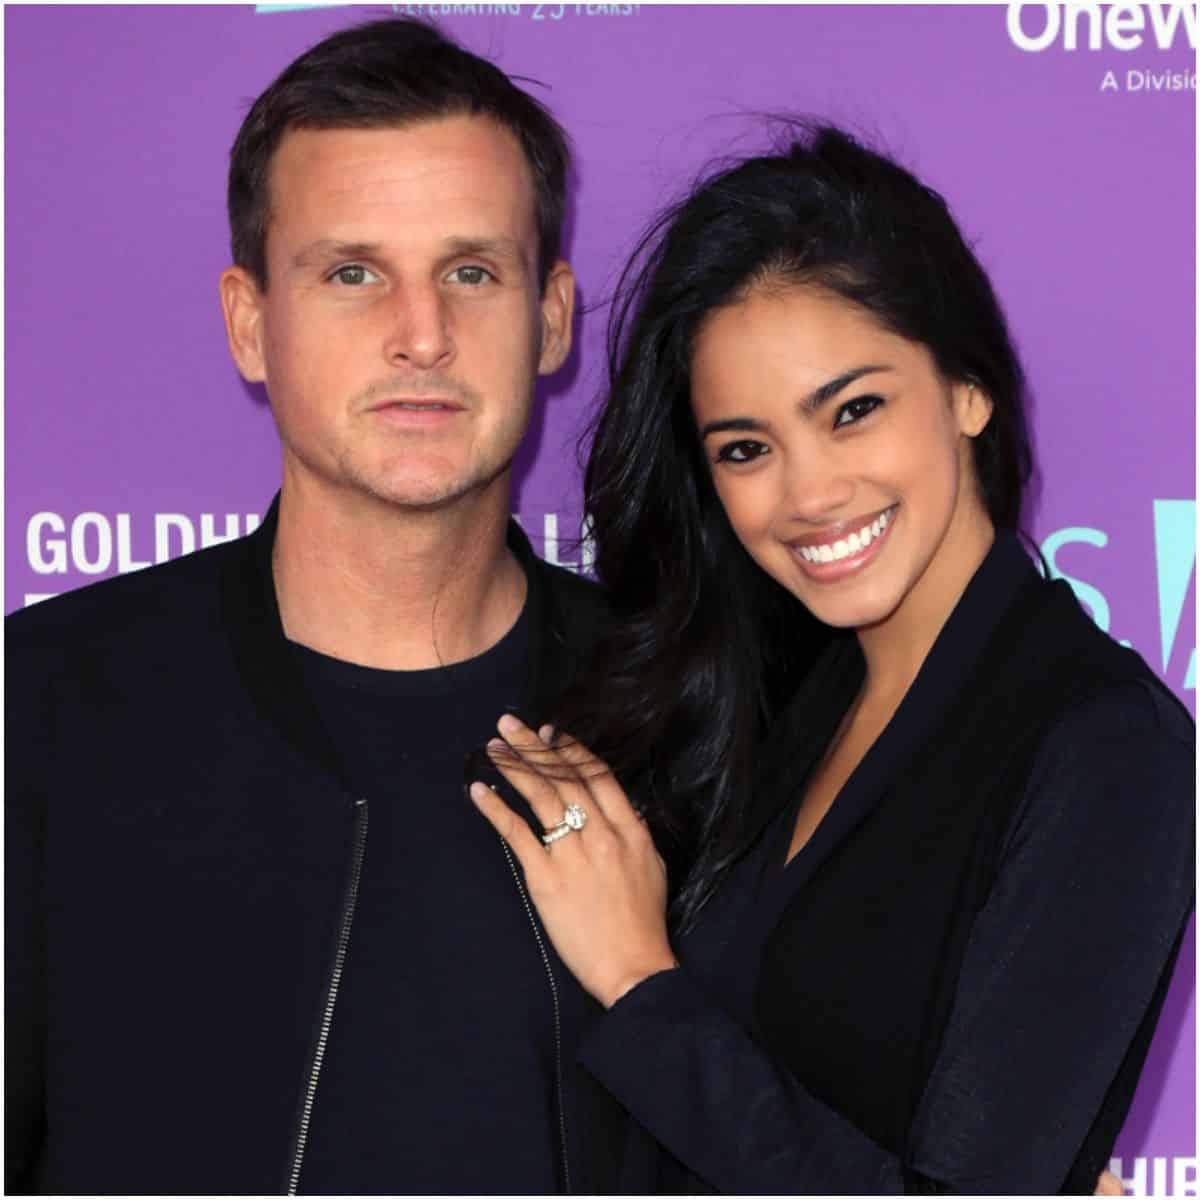 Rob Dyrdek and wife Bryiana Noelle Flores